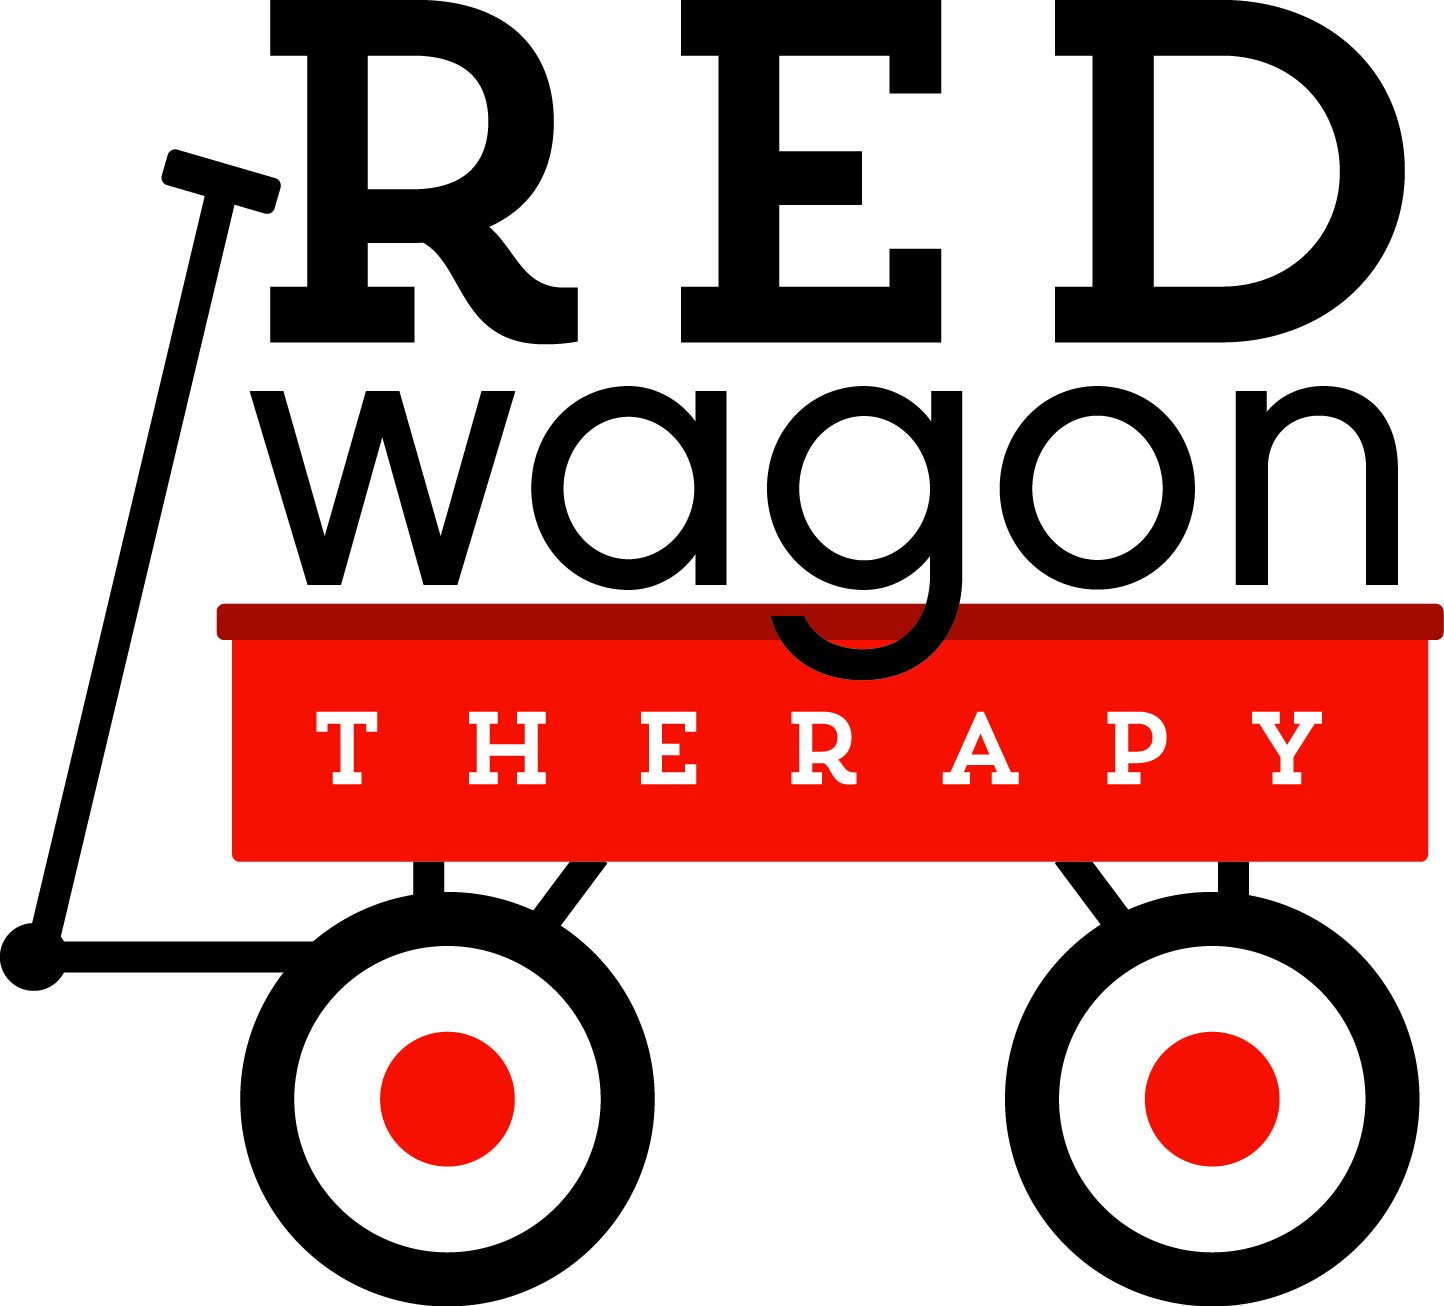 Red Wagon Therapy | Pediatric Therapy Group in Denver, CO